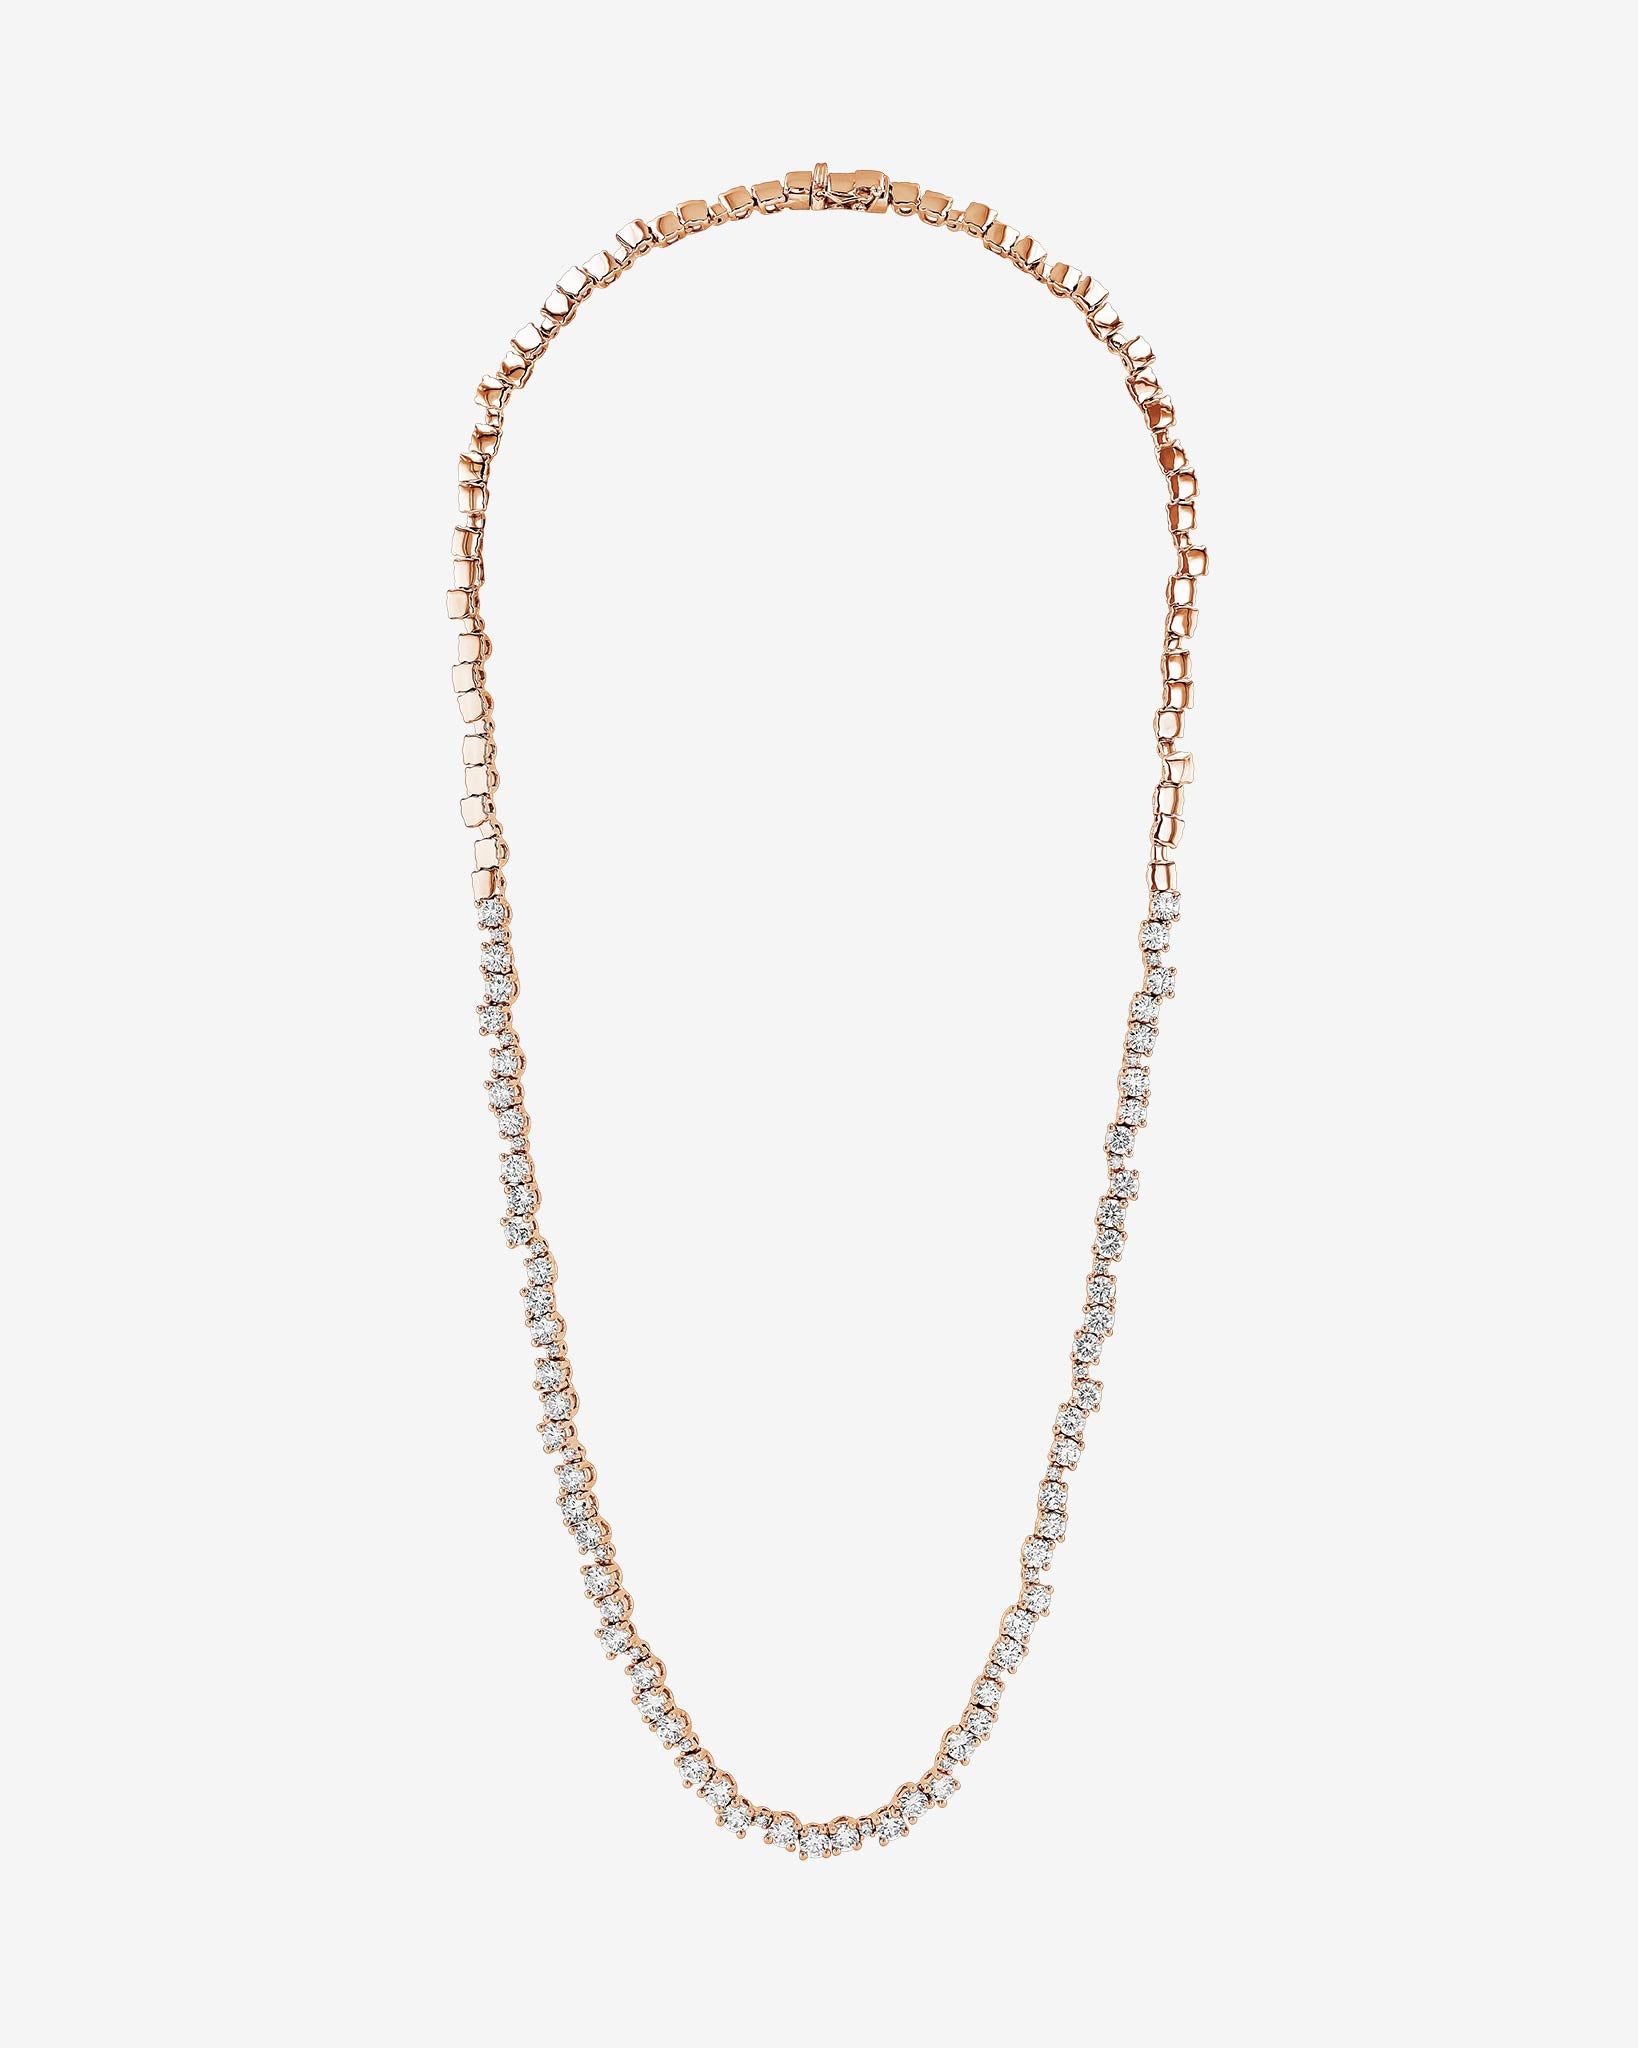 Suzanne Kalan Classic Diamond Round Tennis Necklace in 18k rose gold